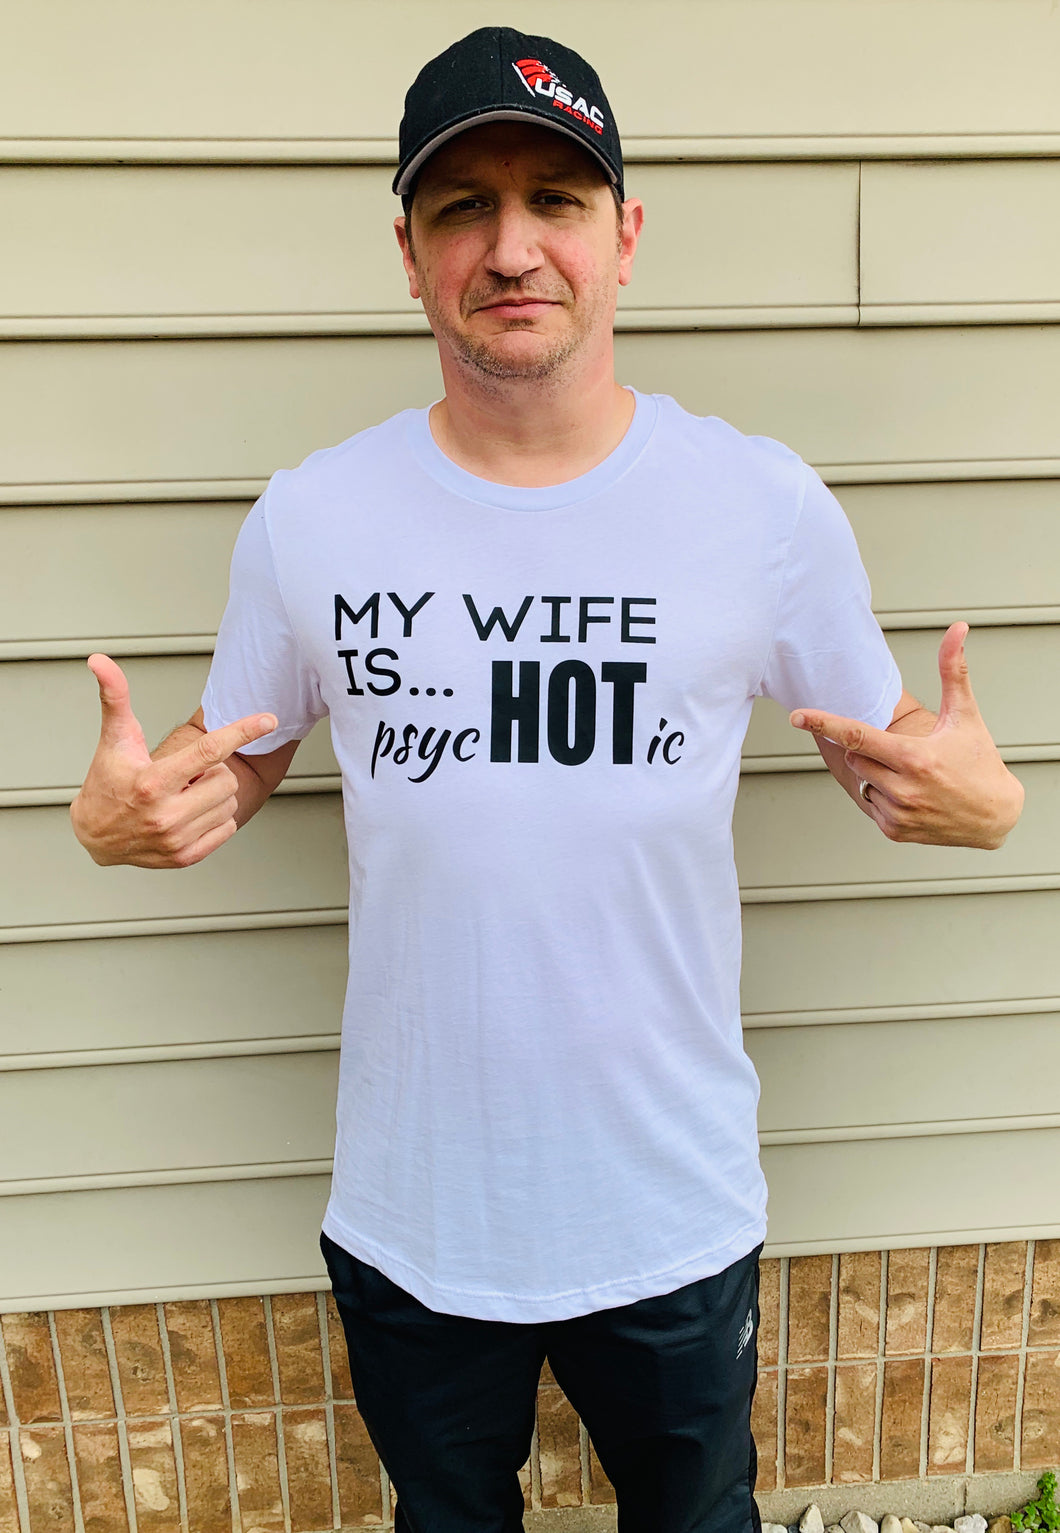 My wife is psychotic. My wife is hot. Funny graphic tee. Unisex fit. - Mavictoria Designs Hot Press Express